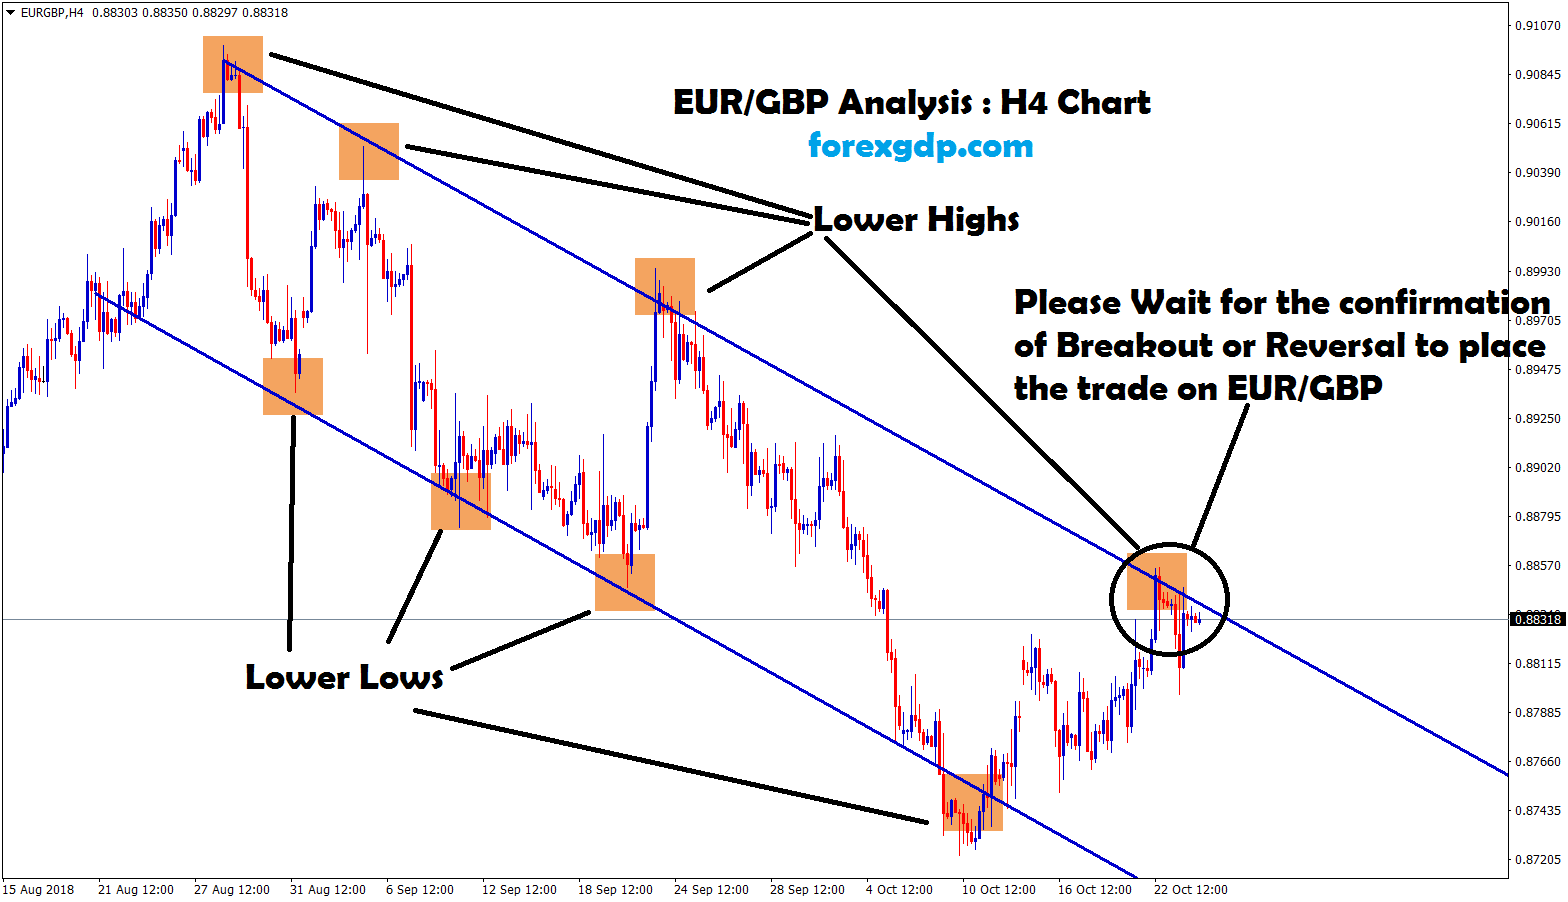 eur gbp forms lower highs , lower lows